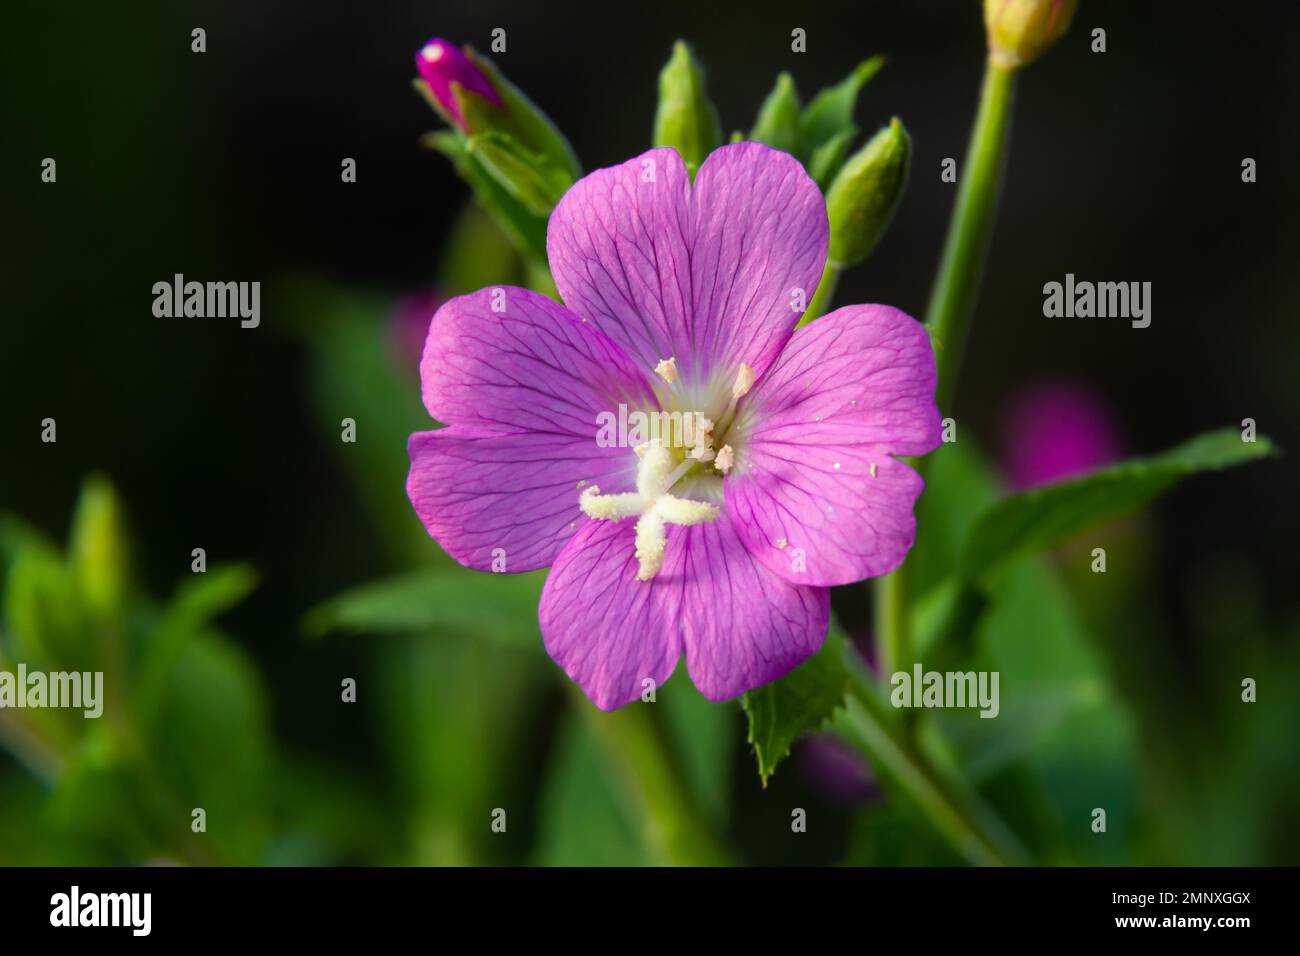 A close-up of a flowering Great willowherb, Epilobium hirsutum on a late summer evening in Estonian nature. Stock Photo